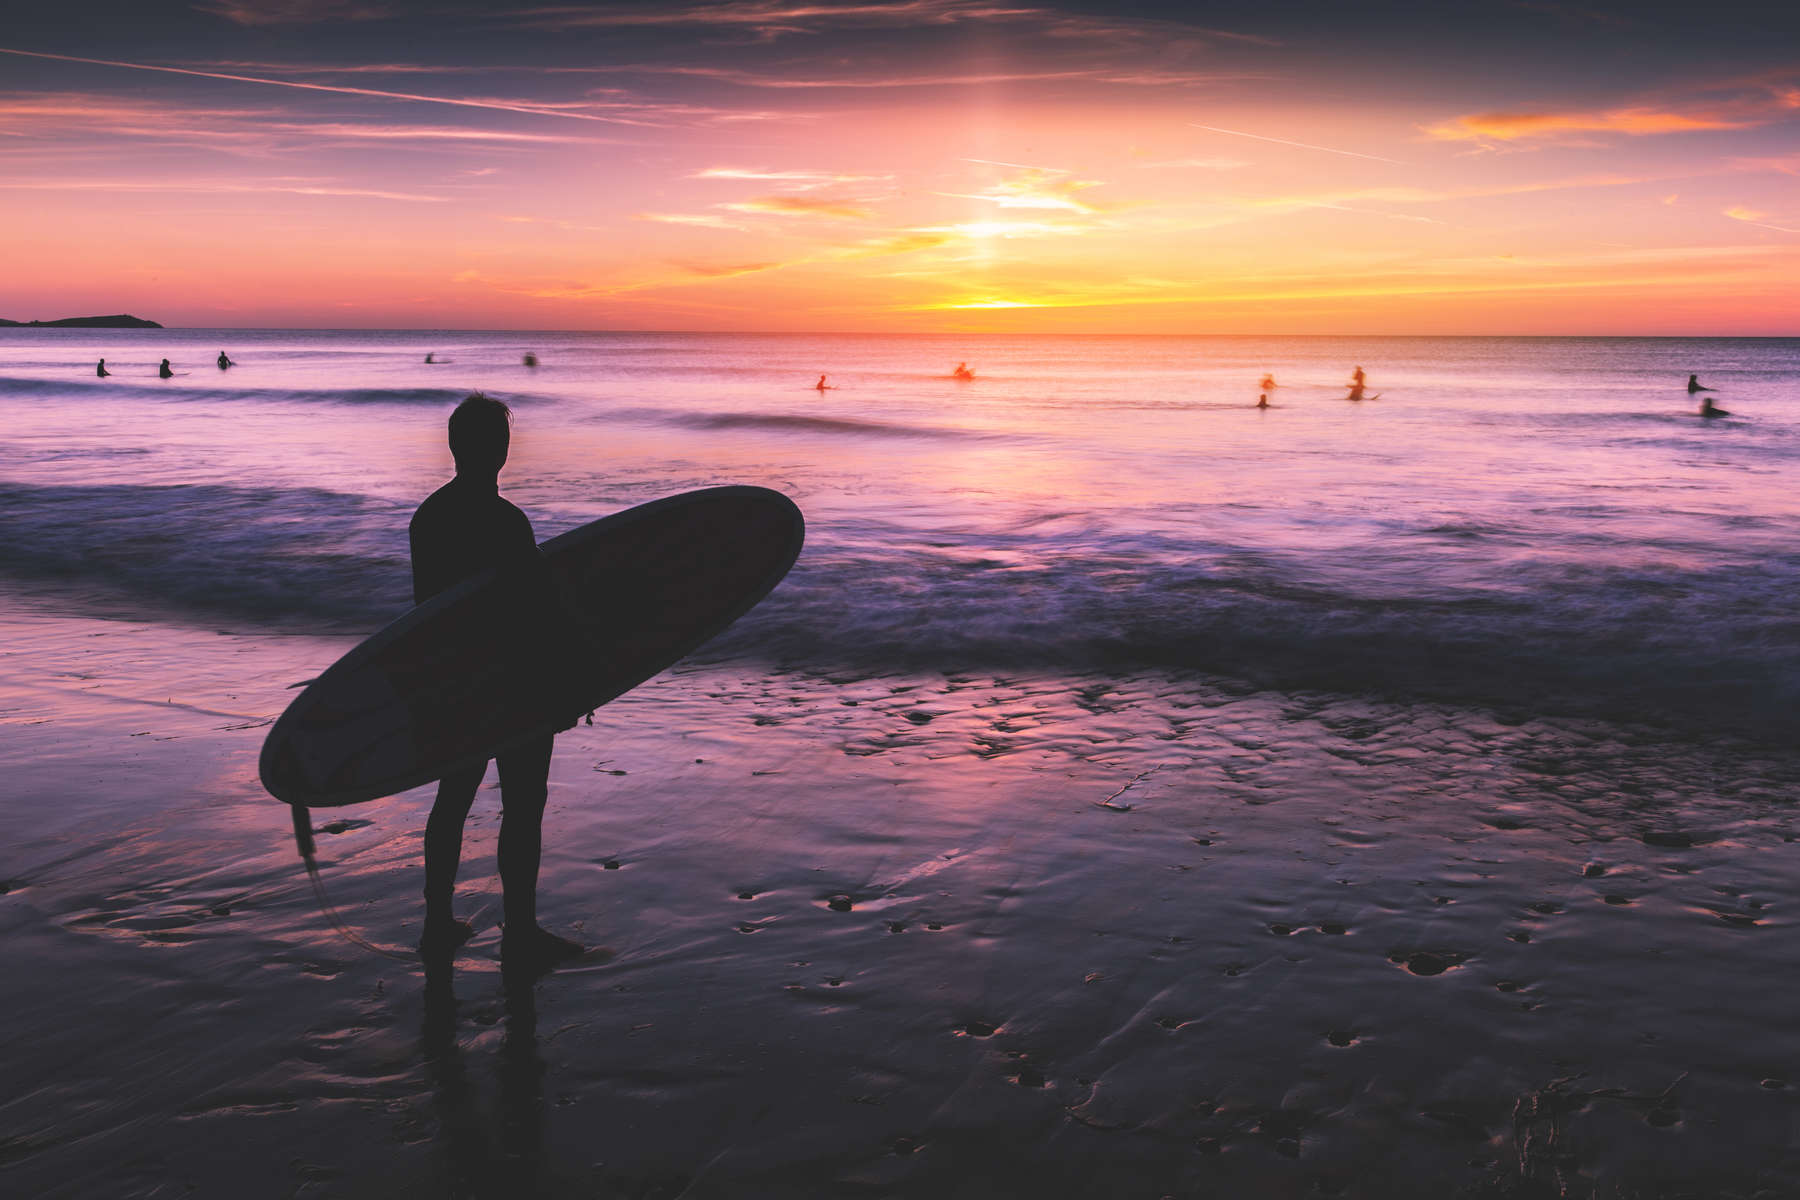 Silhouette of surfer at sunset